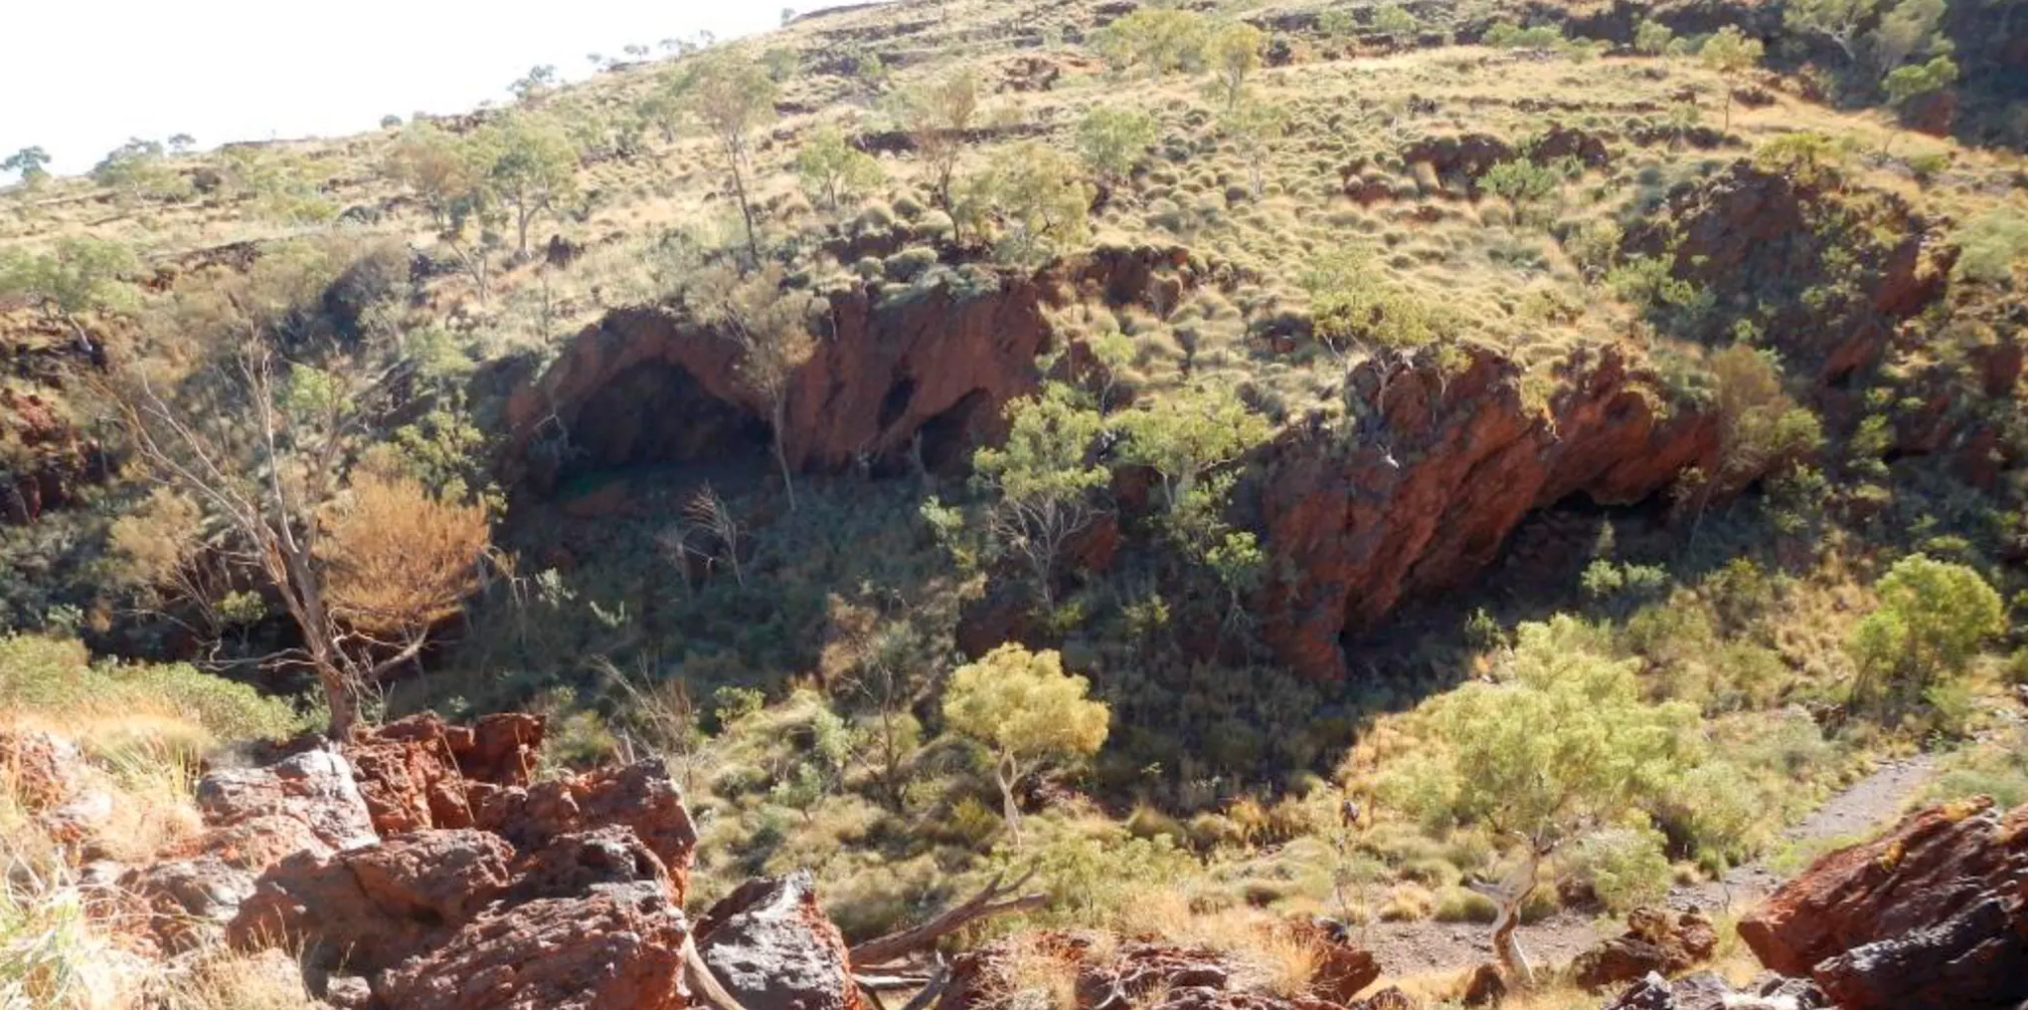 The rock shelters as they appeared in 2013. (Image: PKKP)